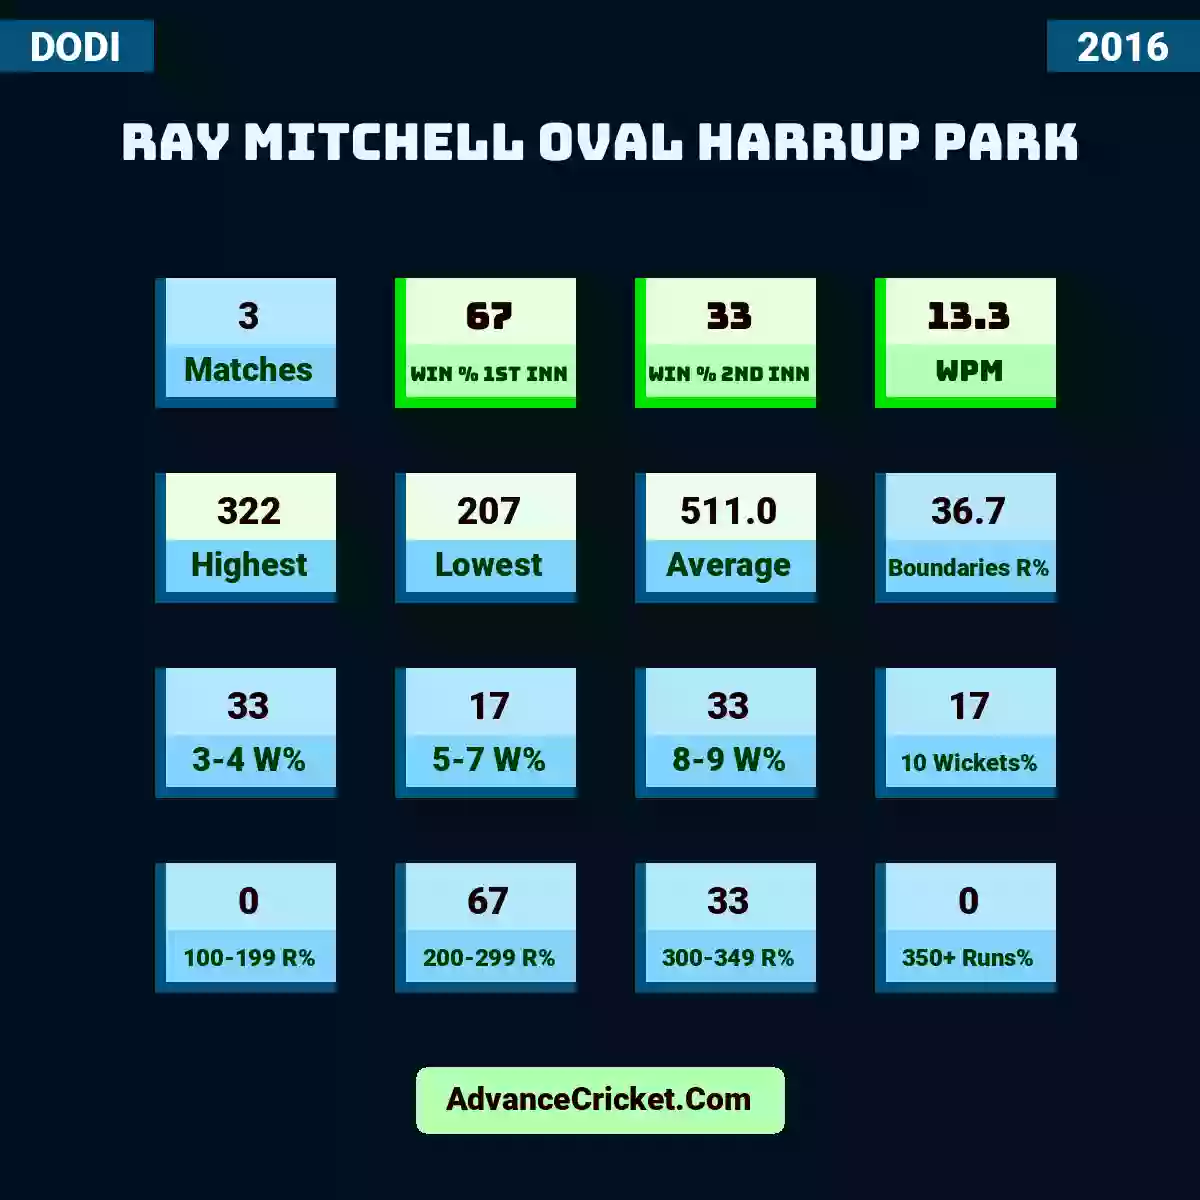 Image showing Ray Mitchell Oval Harrup Park with Matches: 3, Win % 1st Inn: 67, Win % 2nd Inn: 33, WPM: 13.3, Highest: 322, Lowest: 207, Average: 511.0, Boundaries R%: 36.7, 3-4 W%: 33, 5-7 W%: 17, 8-9 W%: 33, 10 Wickets%: 17, 100-199 R%: 0, 200-299 R%: 67, 300-349 R%: 33, 350+ Runs%: 0.